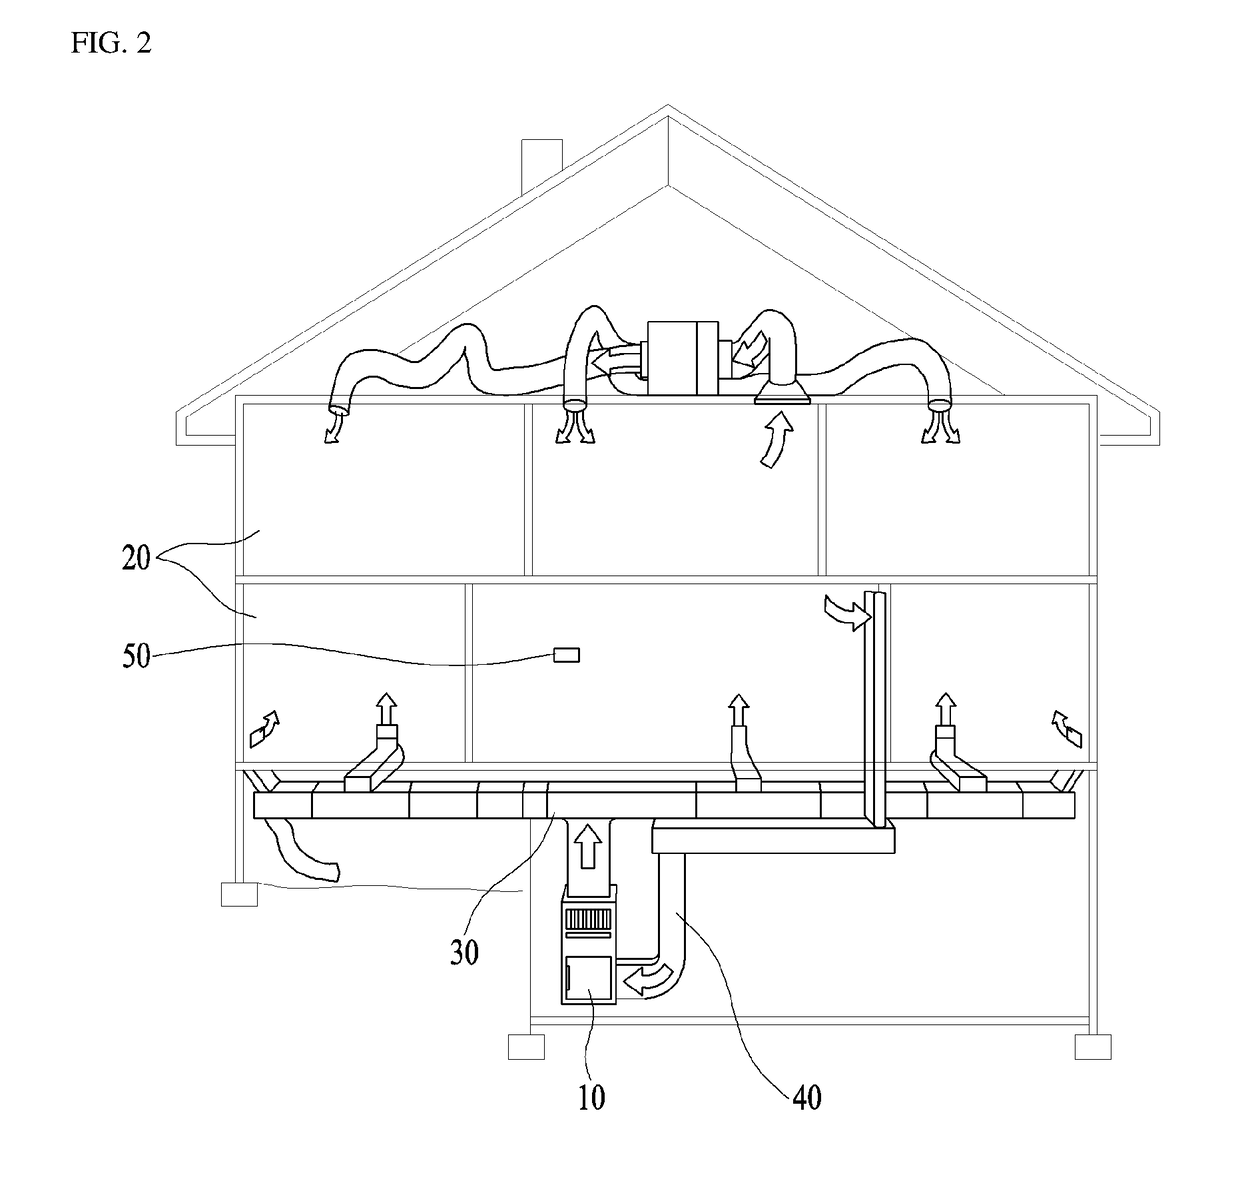 Gas furnace for heating indoor space and controlling method thereof